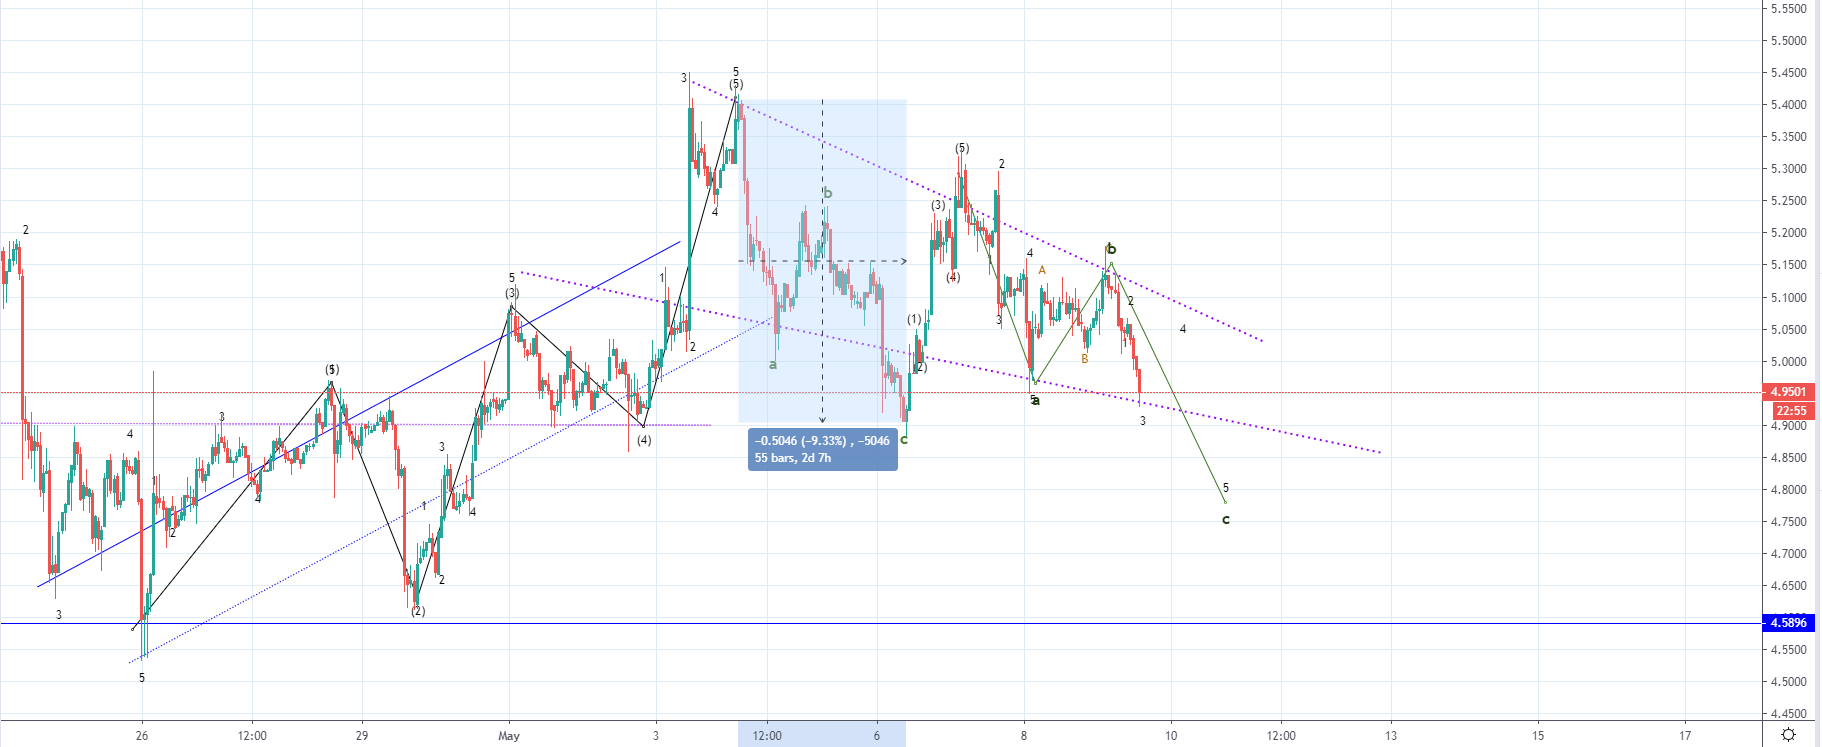 LTC/USD and EOS/USD: Descending triangles form as corrections are developing